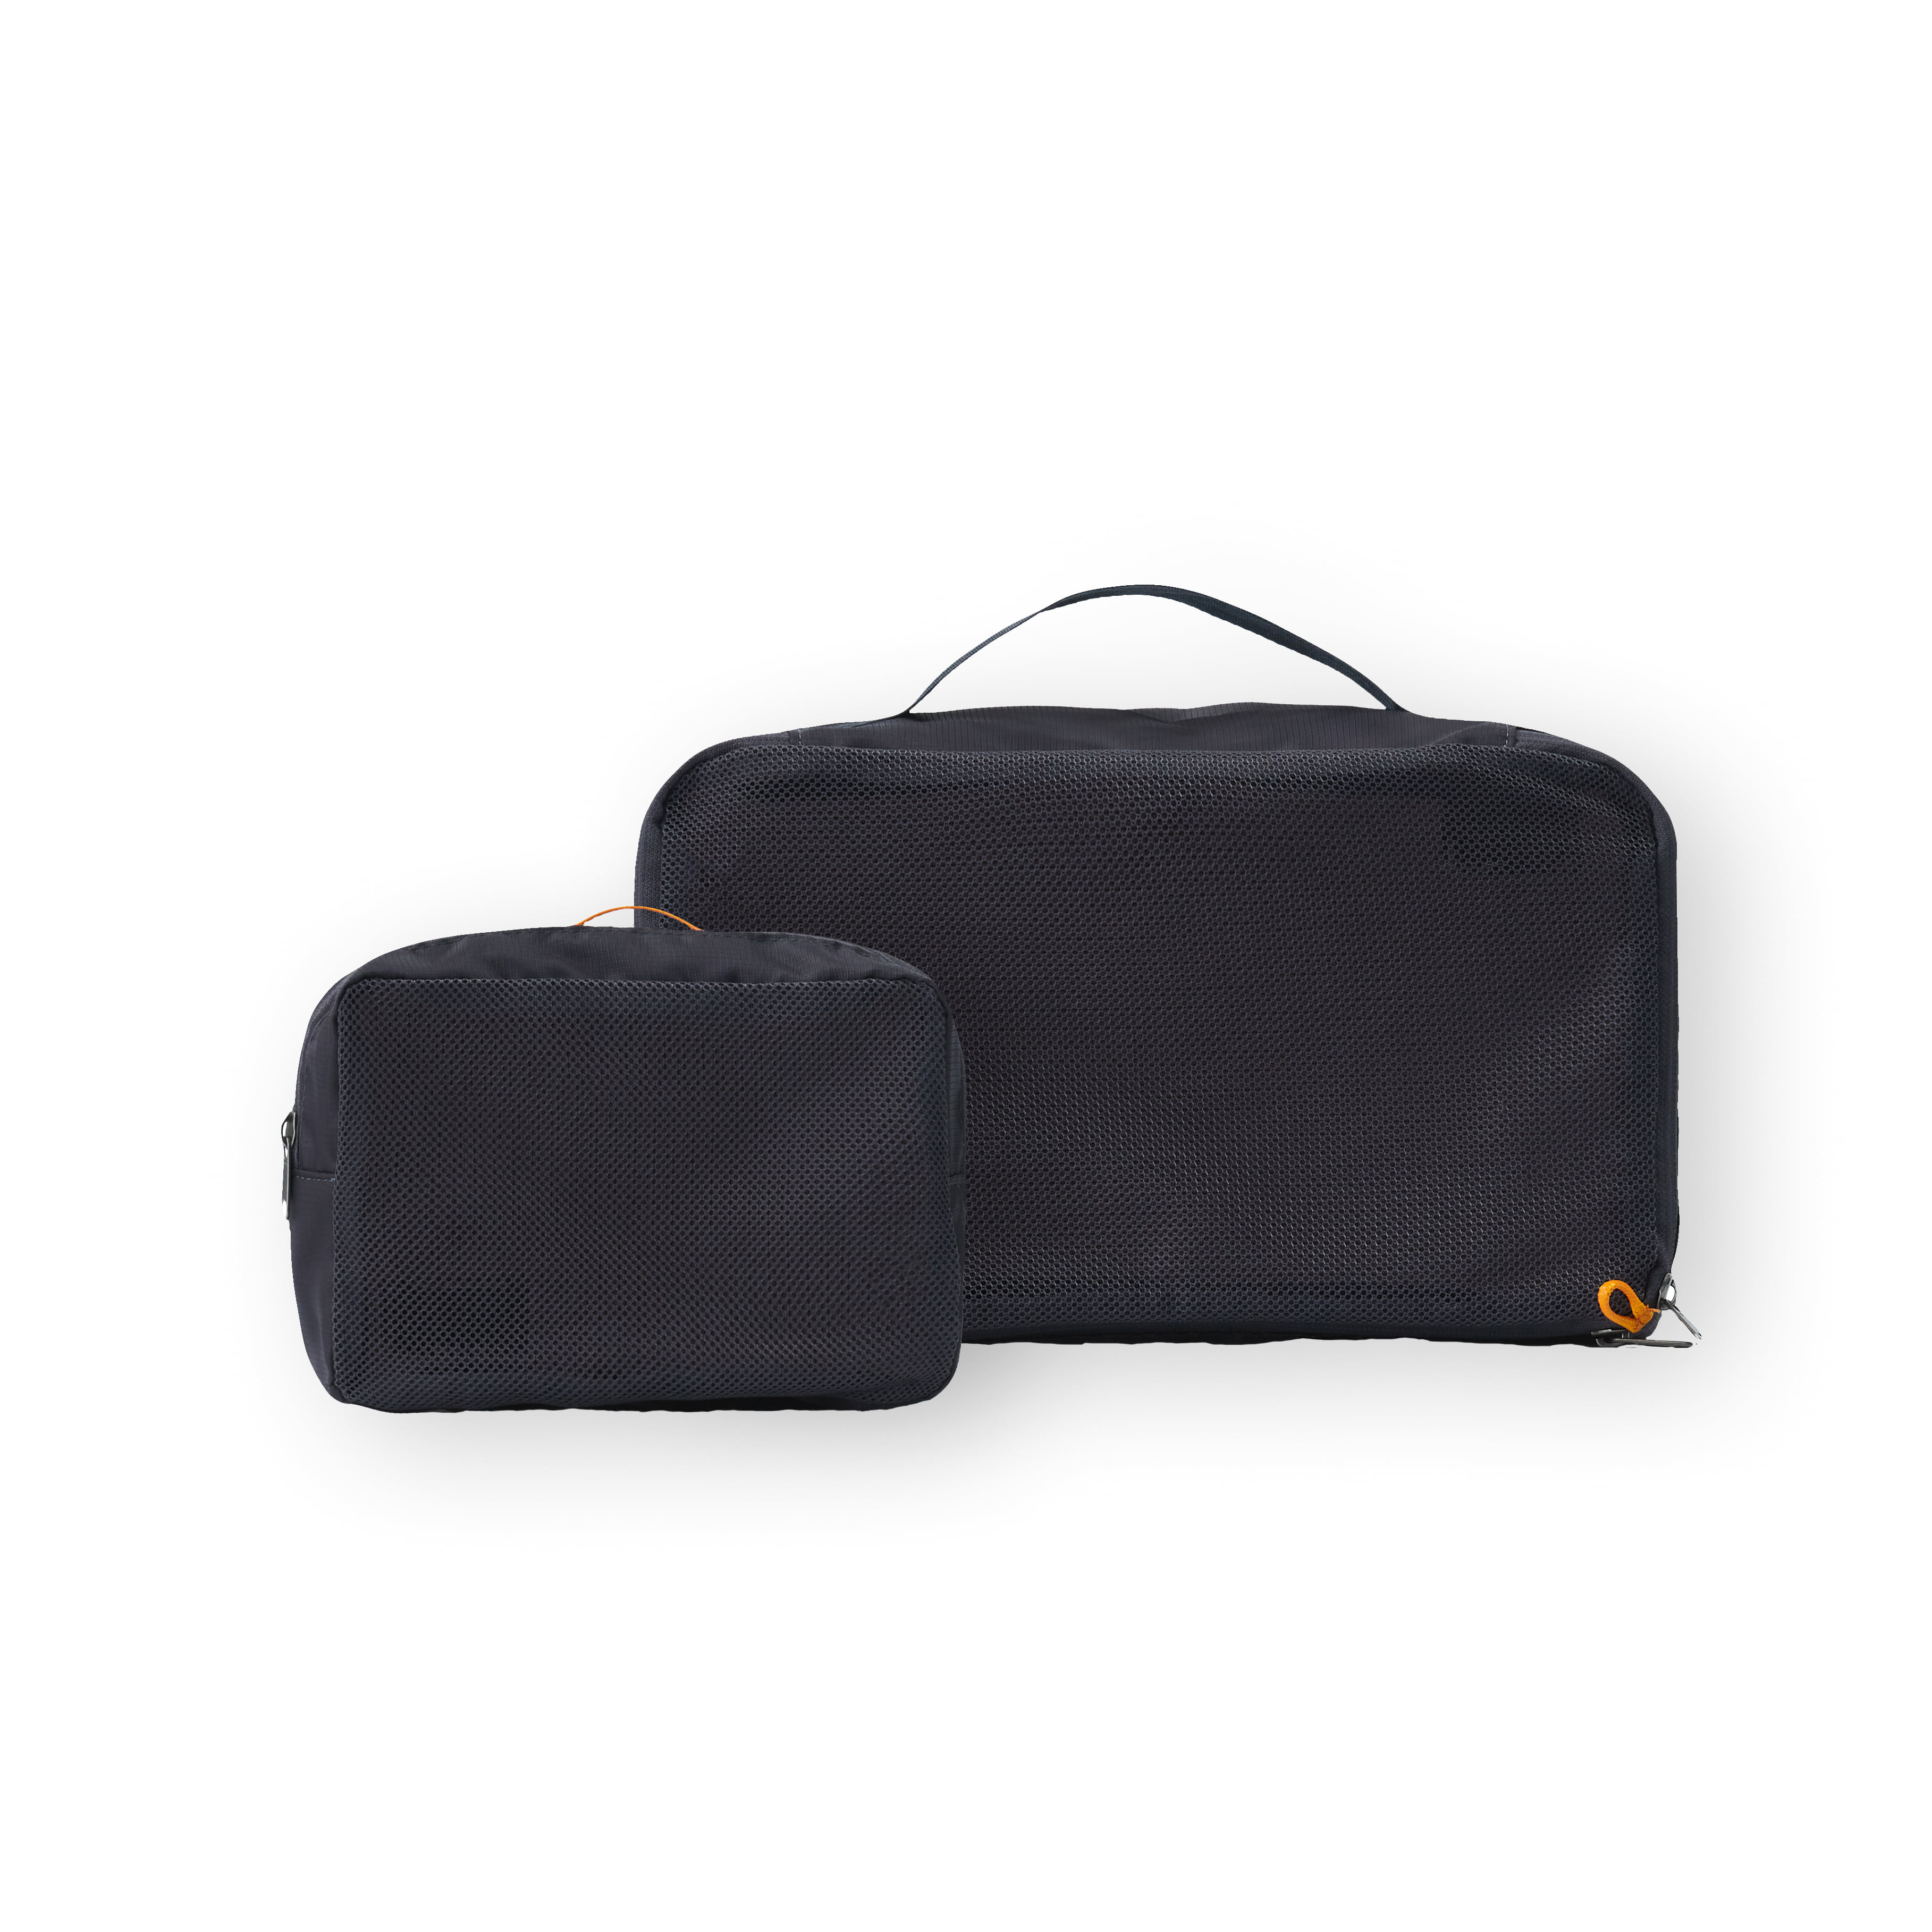 R TRAVEL POUCH SET 510 CHARCOAL